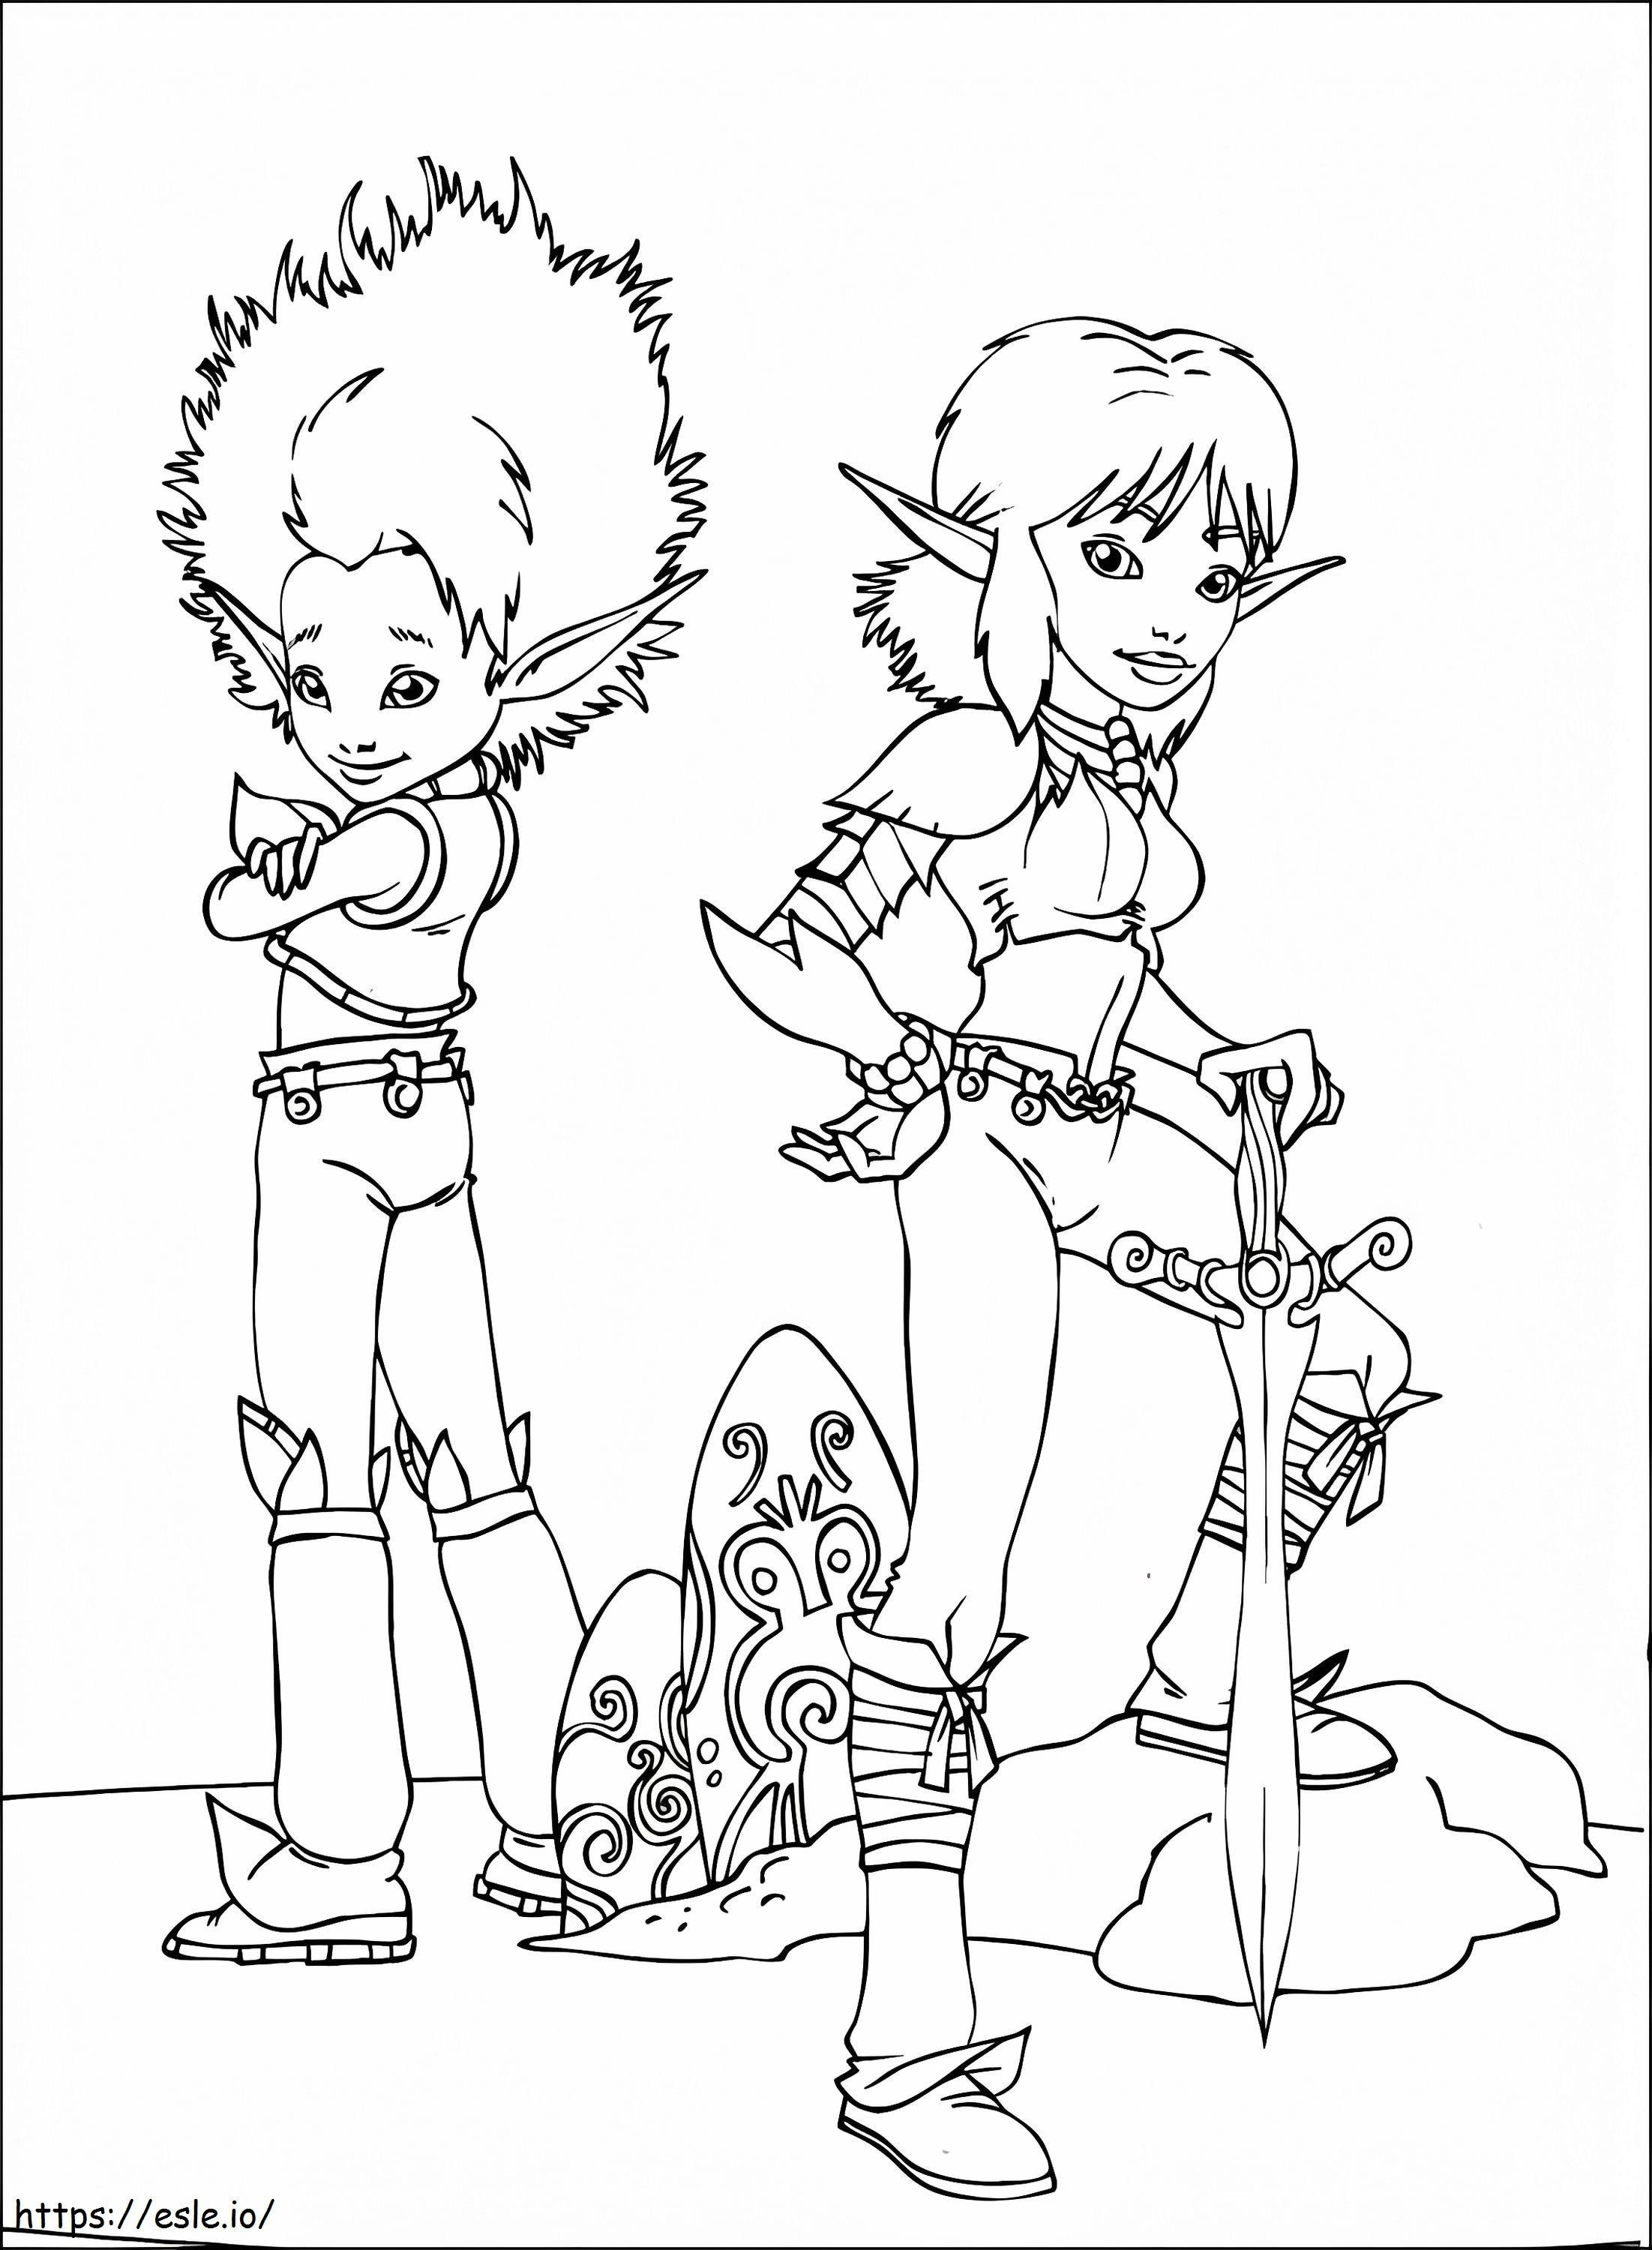 1533526858 Selenia And Arthur A4 coloring page